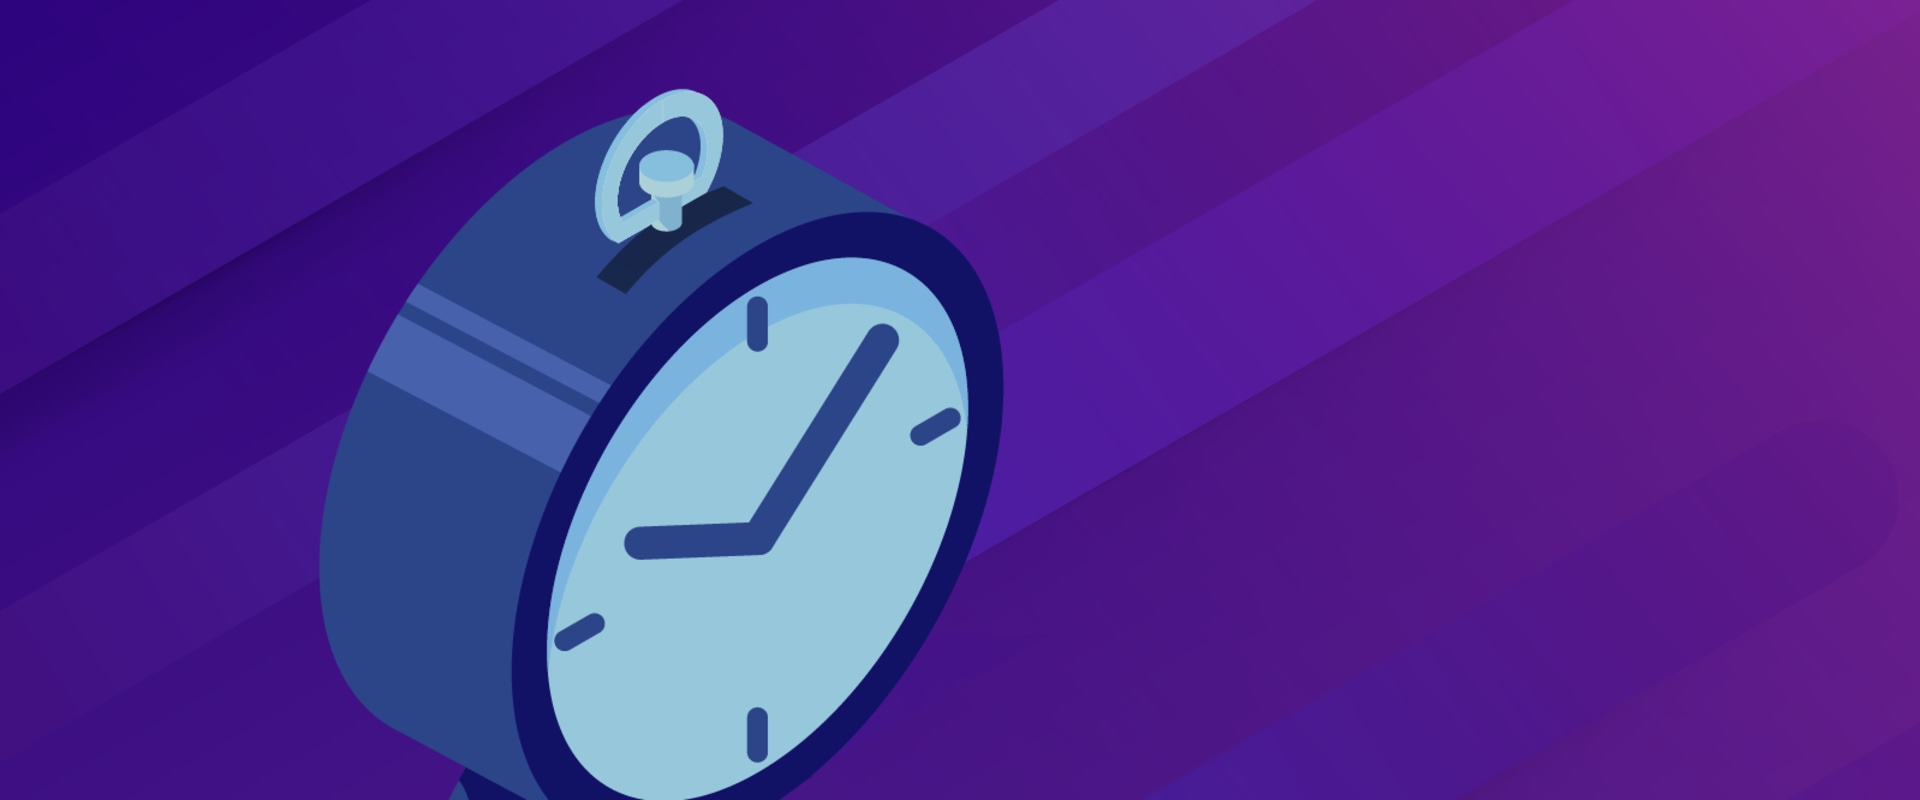 How to Manage Time Effectively: Tips from a Professional Coach